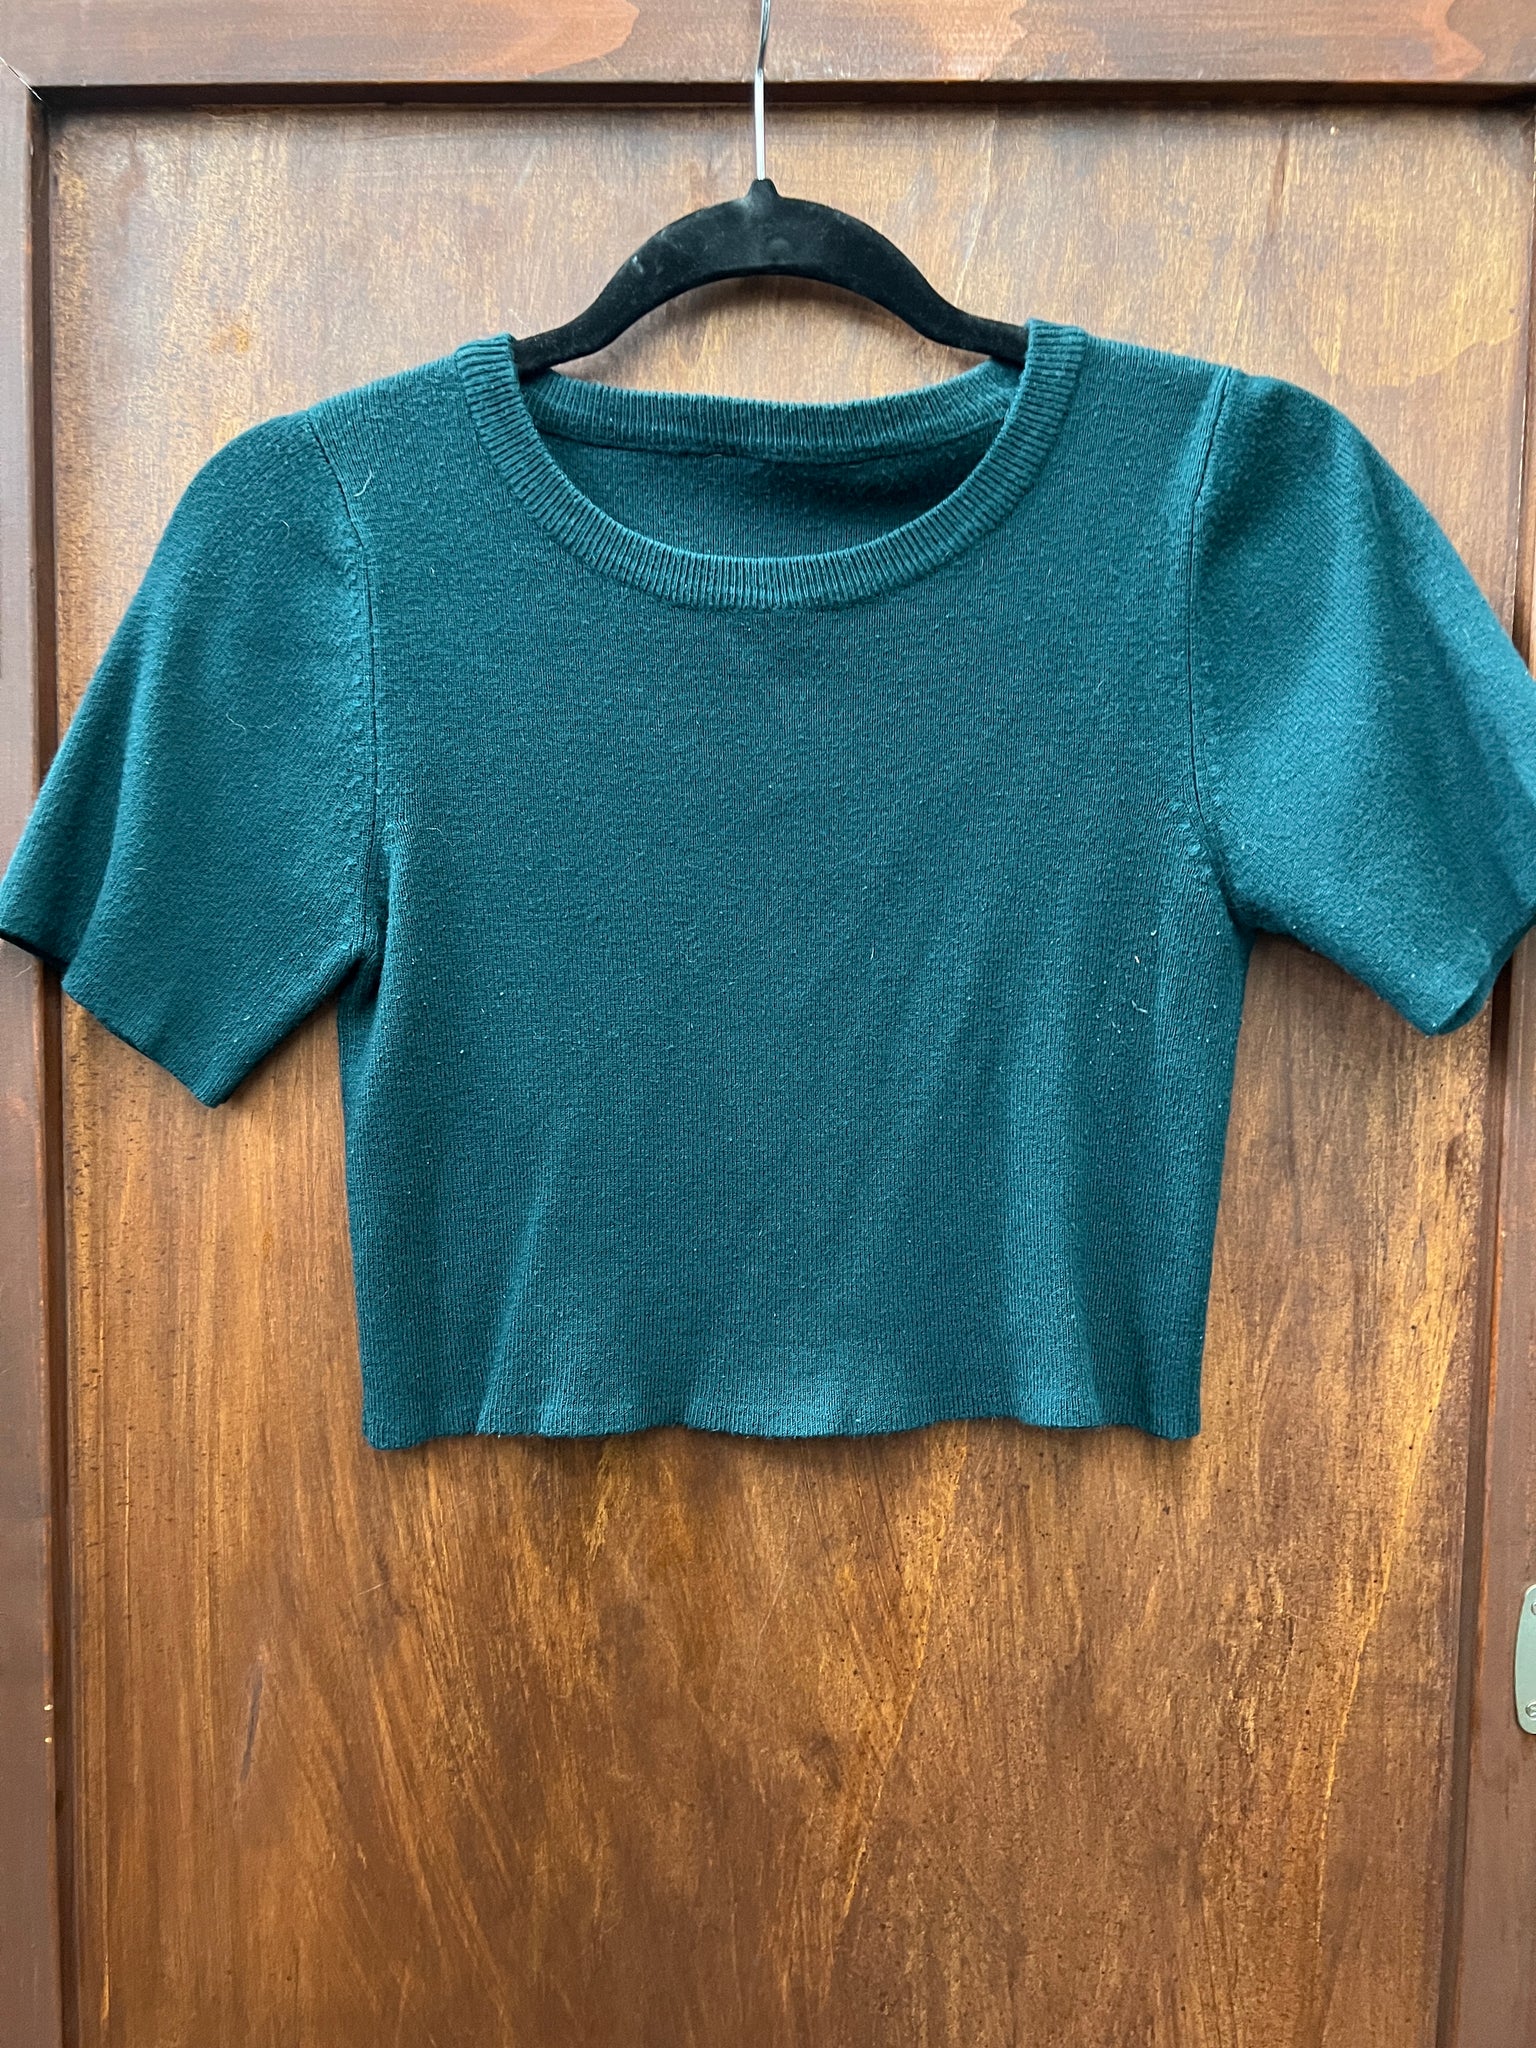 1990s TOPS- forrest green crop knit s/s top